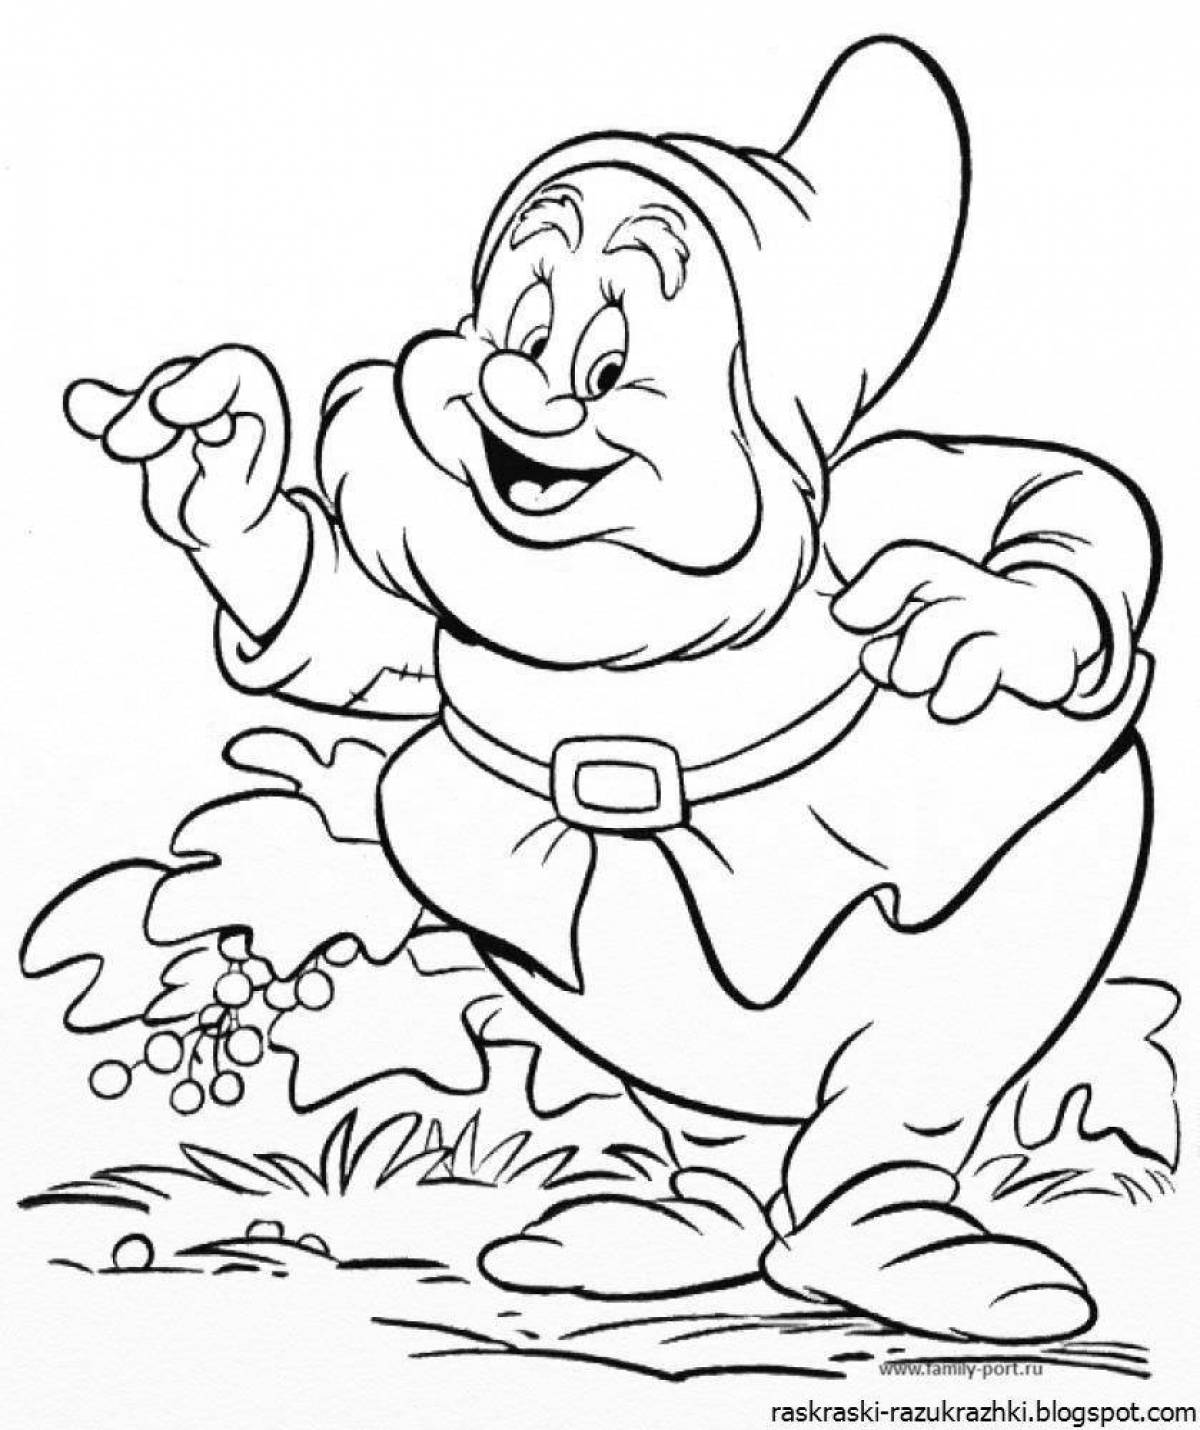 Gnomes Live Coloring Pages